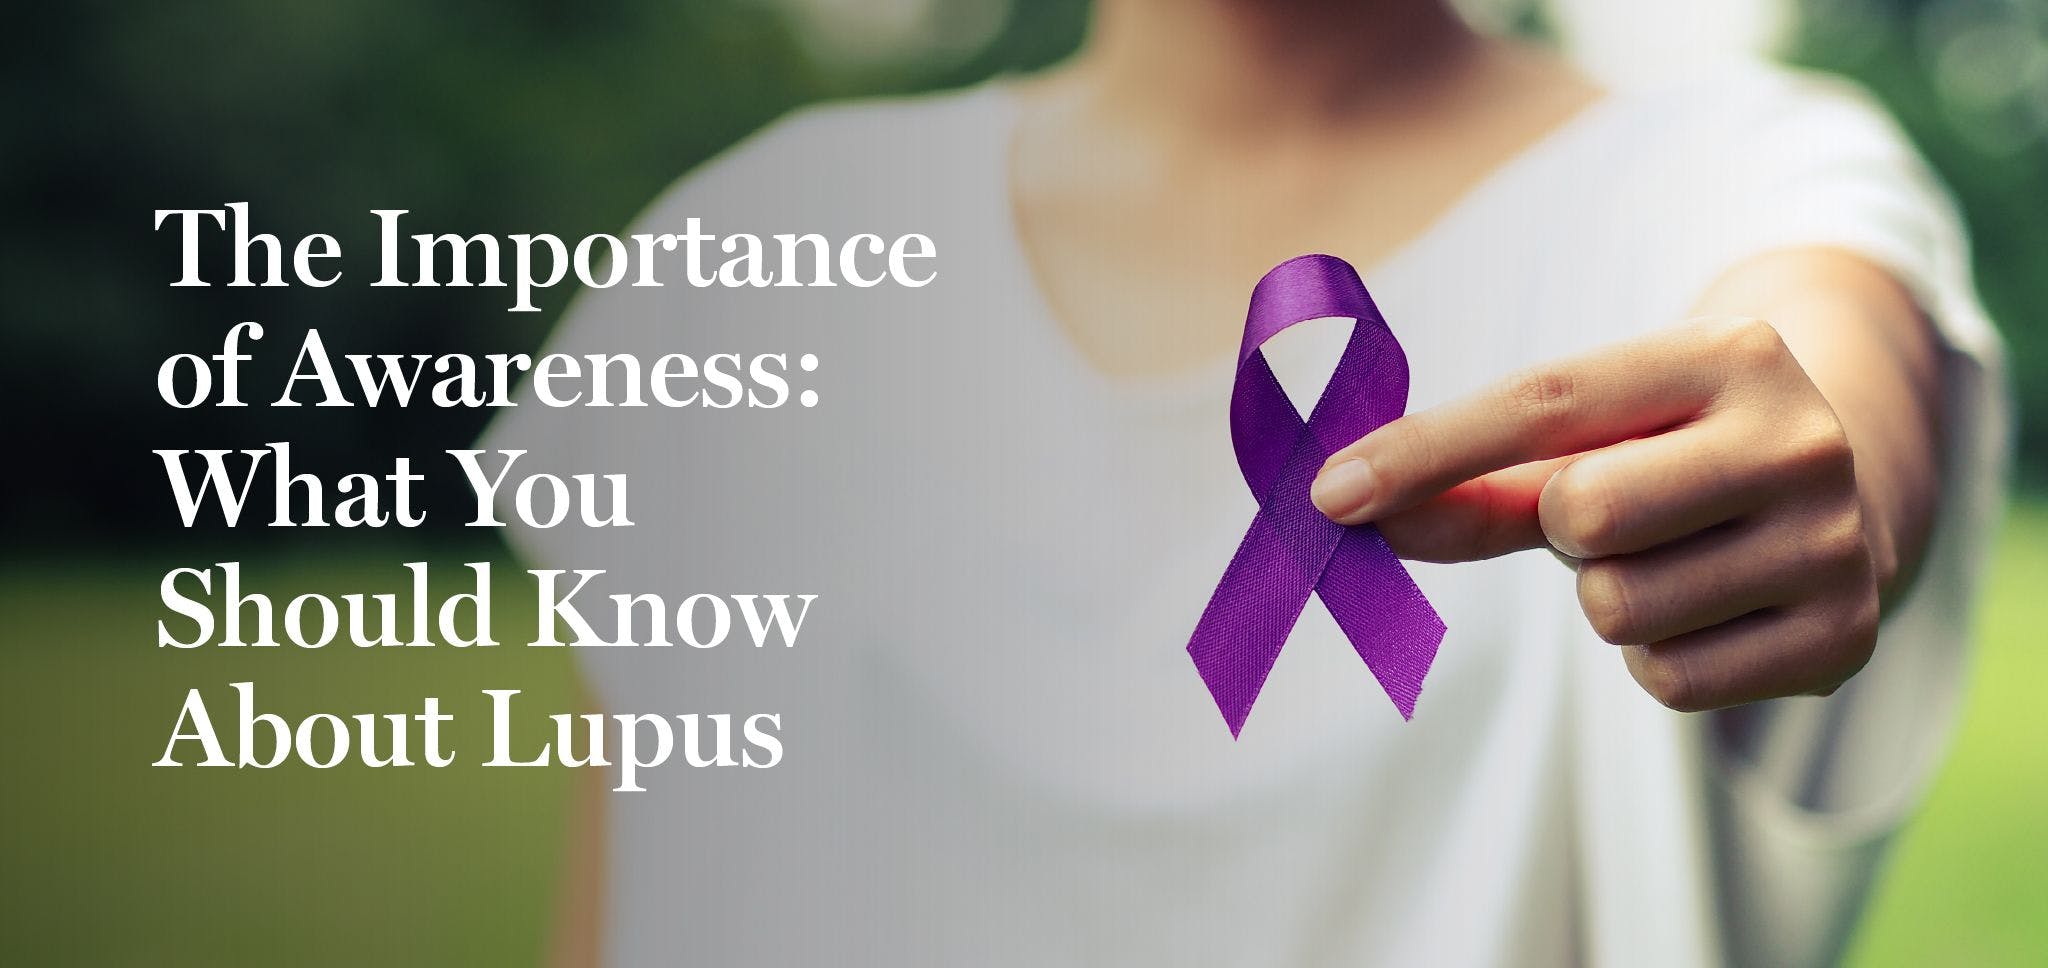 The Importance of Awareness: What You Should Know About Lupus